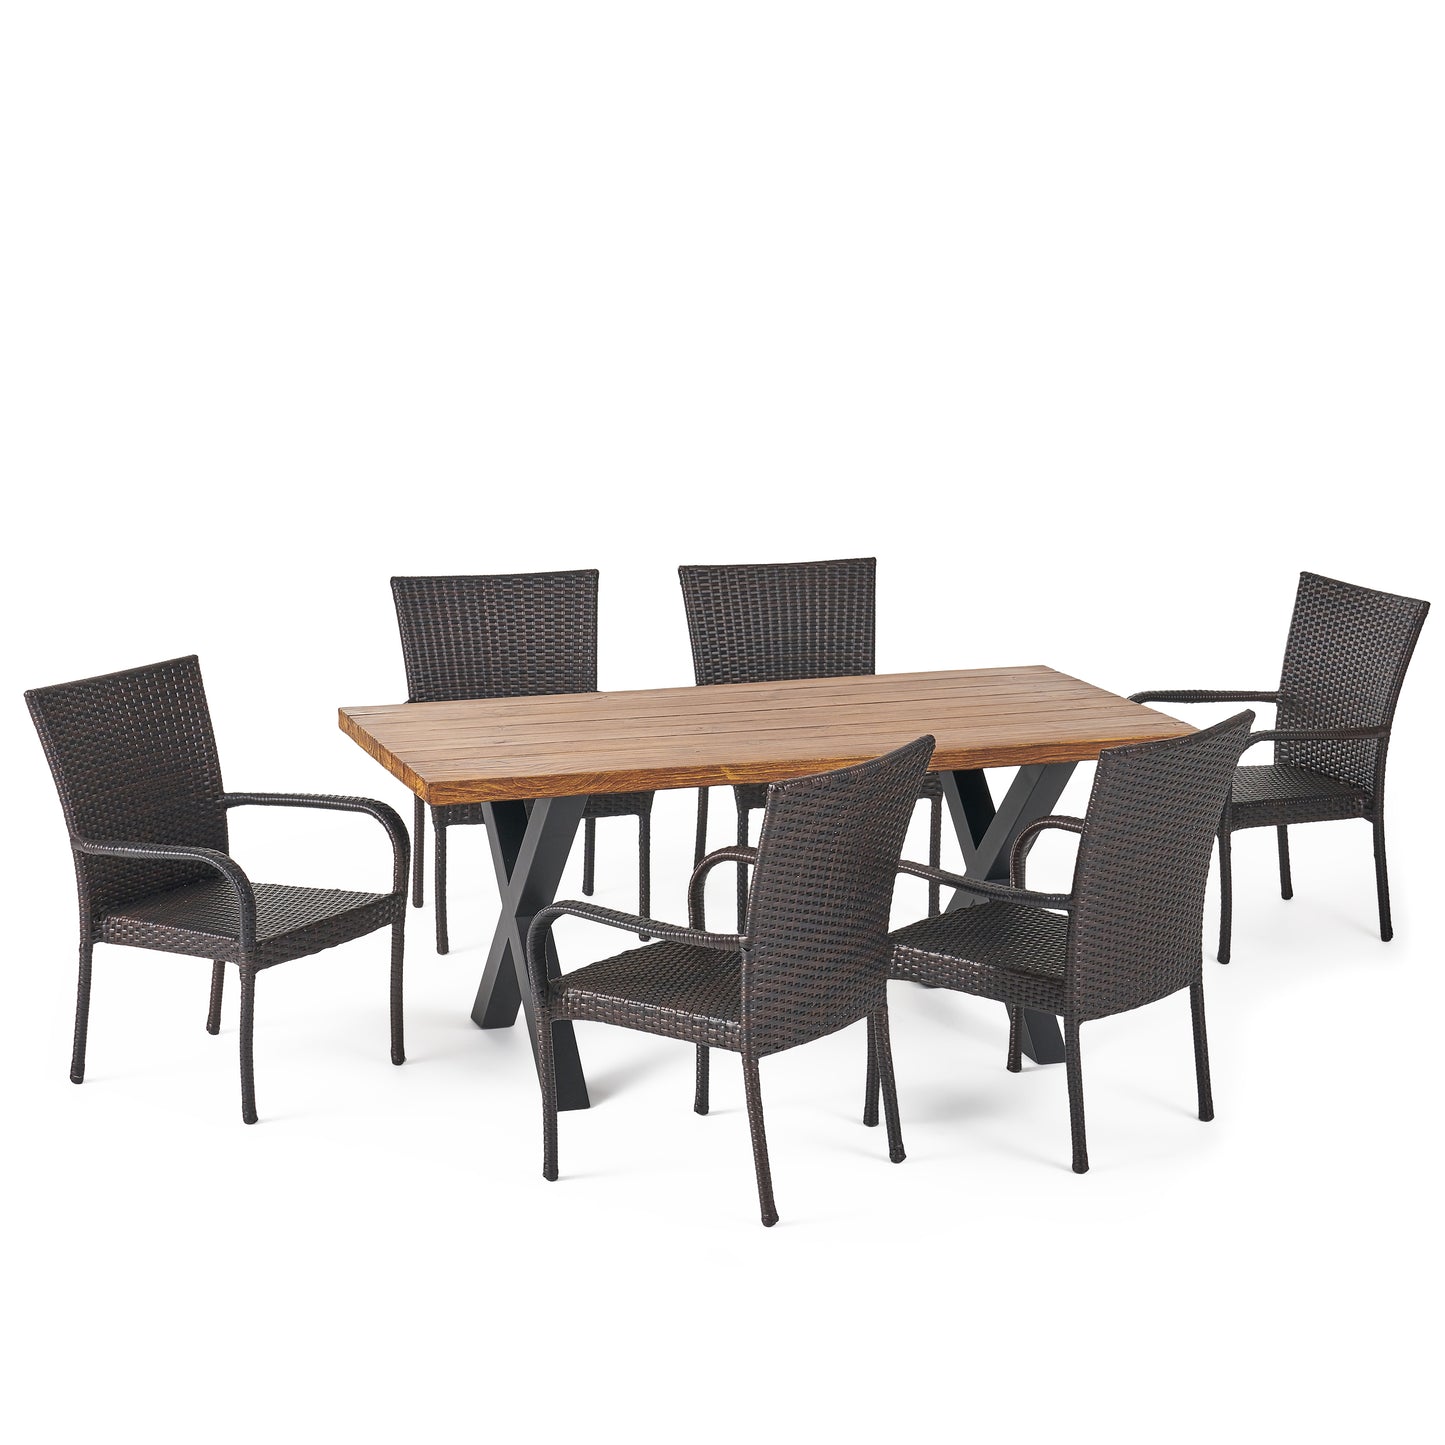 Amaryllis Outdoor 7 Piece Wicker Dining Set with Light Weight Concrete Table